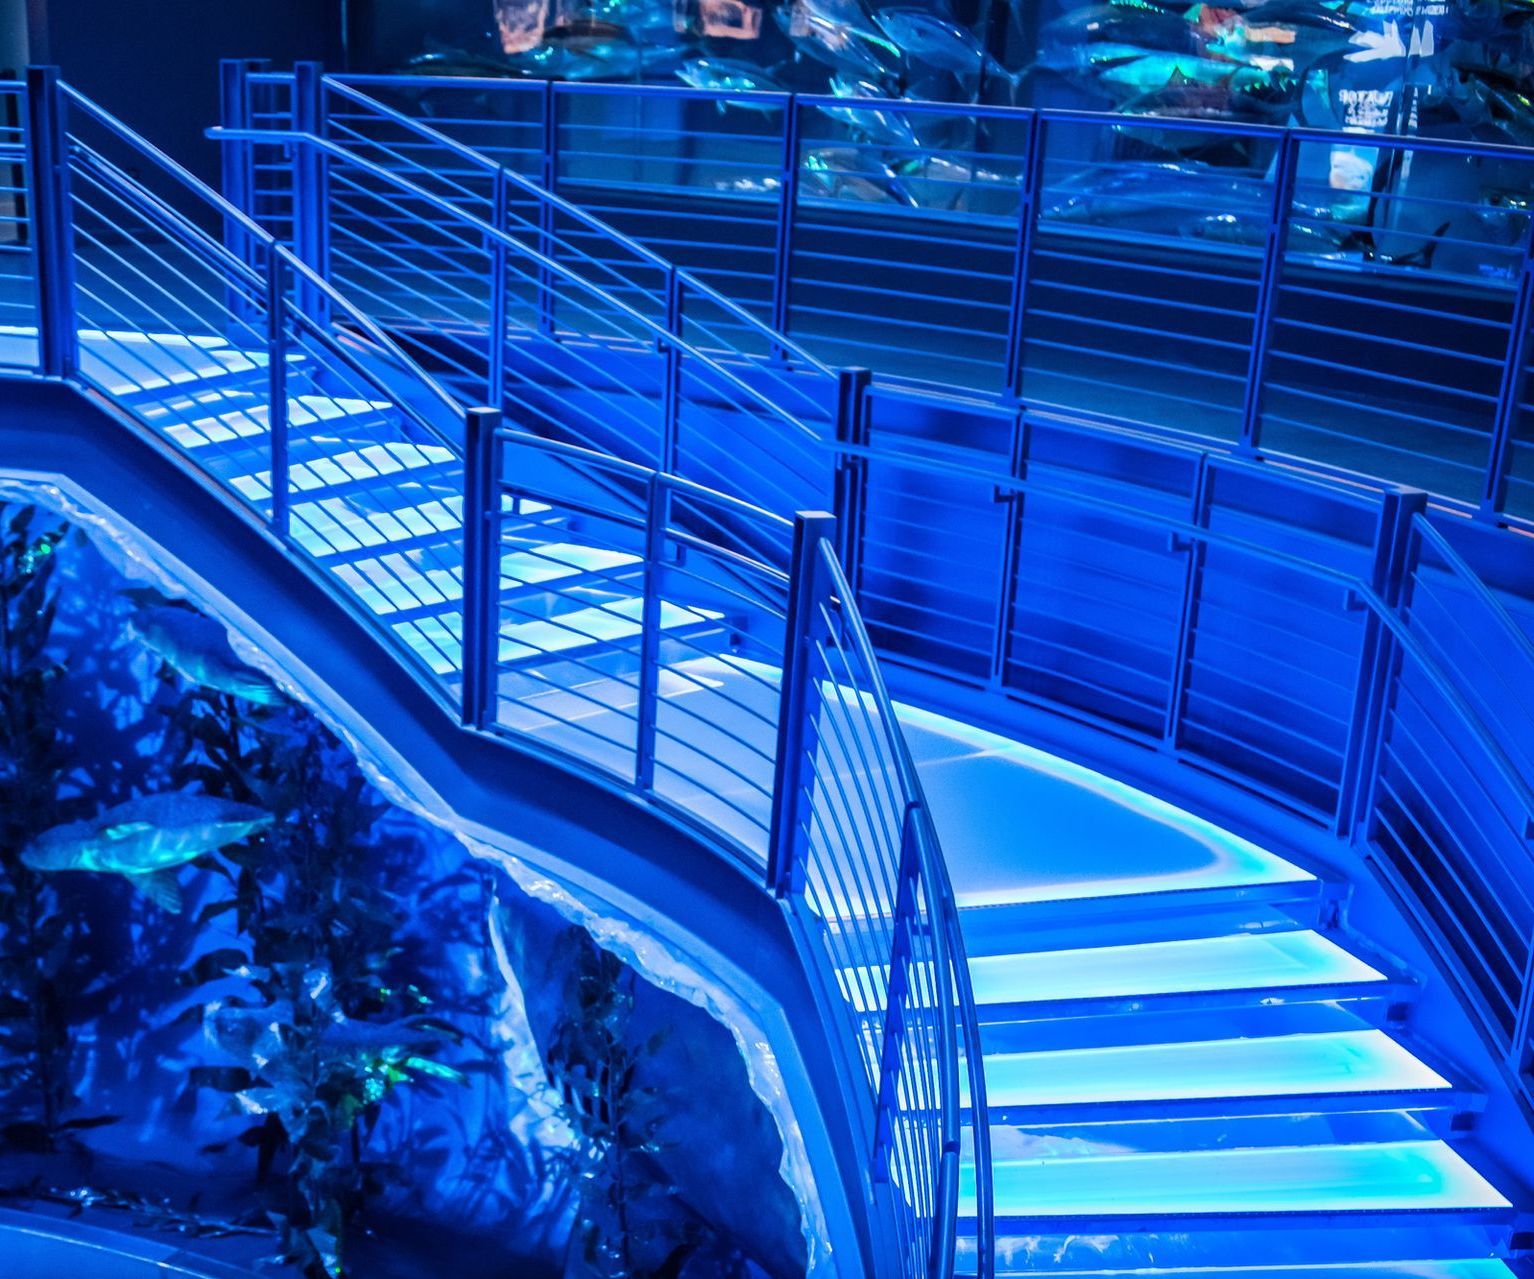 Glass stairs illuminated with blue LED lights at the Bass Pro Shops headquarters.